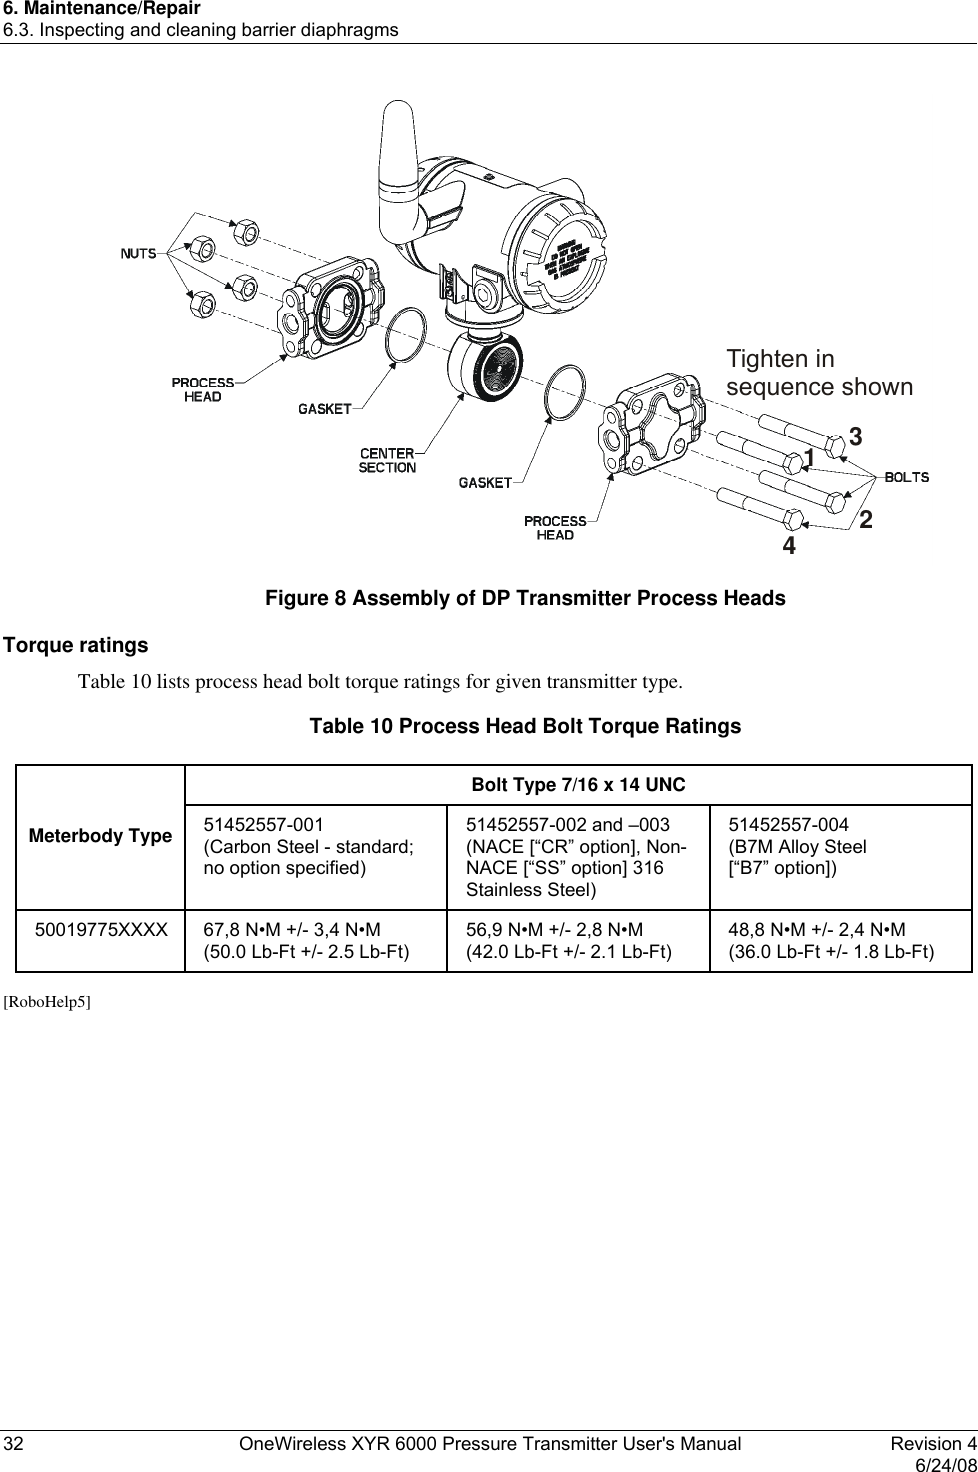 6. Maintenance/Repair 6.3. Inspecting and cleaning barrier diaphragms 32  OneWireless XYR 6000 Pressure Transmitter User&apos;s Manual   Revision 4   6/24/08 1234Tighten in sequence shown Figure 8 Assembly of DP Transmitter Process Heads Torque ratings Table 10 lists process head bolt torque ratings for given transmitter type.  Table 10 Process Head Bolt Torque Ratings  Bolt Type 7/16 x 14 UNC Meterbody Type  51452557-001 (Carbon Steel - standard; no option specified) 51452557-002 and –003 (NACE [“CR” option], Non-NACE [“SS” option] 316 Stainless Steel)  51452557-004 (B7M Alloy Steel [“B7” option]) 50019775XXXX  67,8 N•M +/- 3,4 N•M (50.0 Lb-Ft +/- 2.5 Lb-Ft) 56,9 N•M +/- 2,8 N•M (42.0 Lb-Ft +/- 2.1 Lb-Ft) 48,8 N•M +/- 2,4 N•M (36.0 Lb-Ft +/- 1.8 Lb-Ft)   [RoboHelp5]    